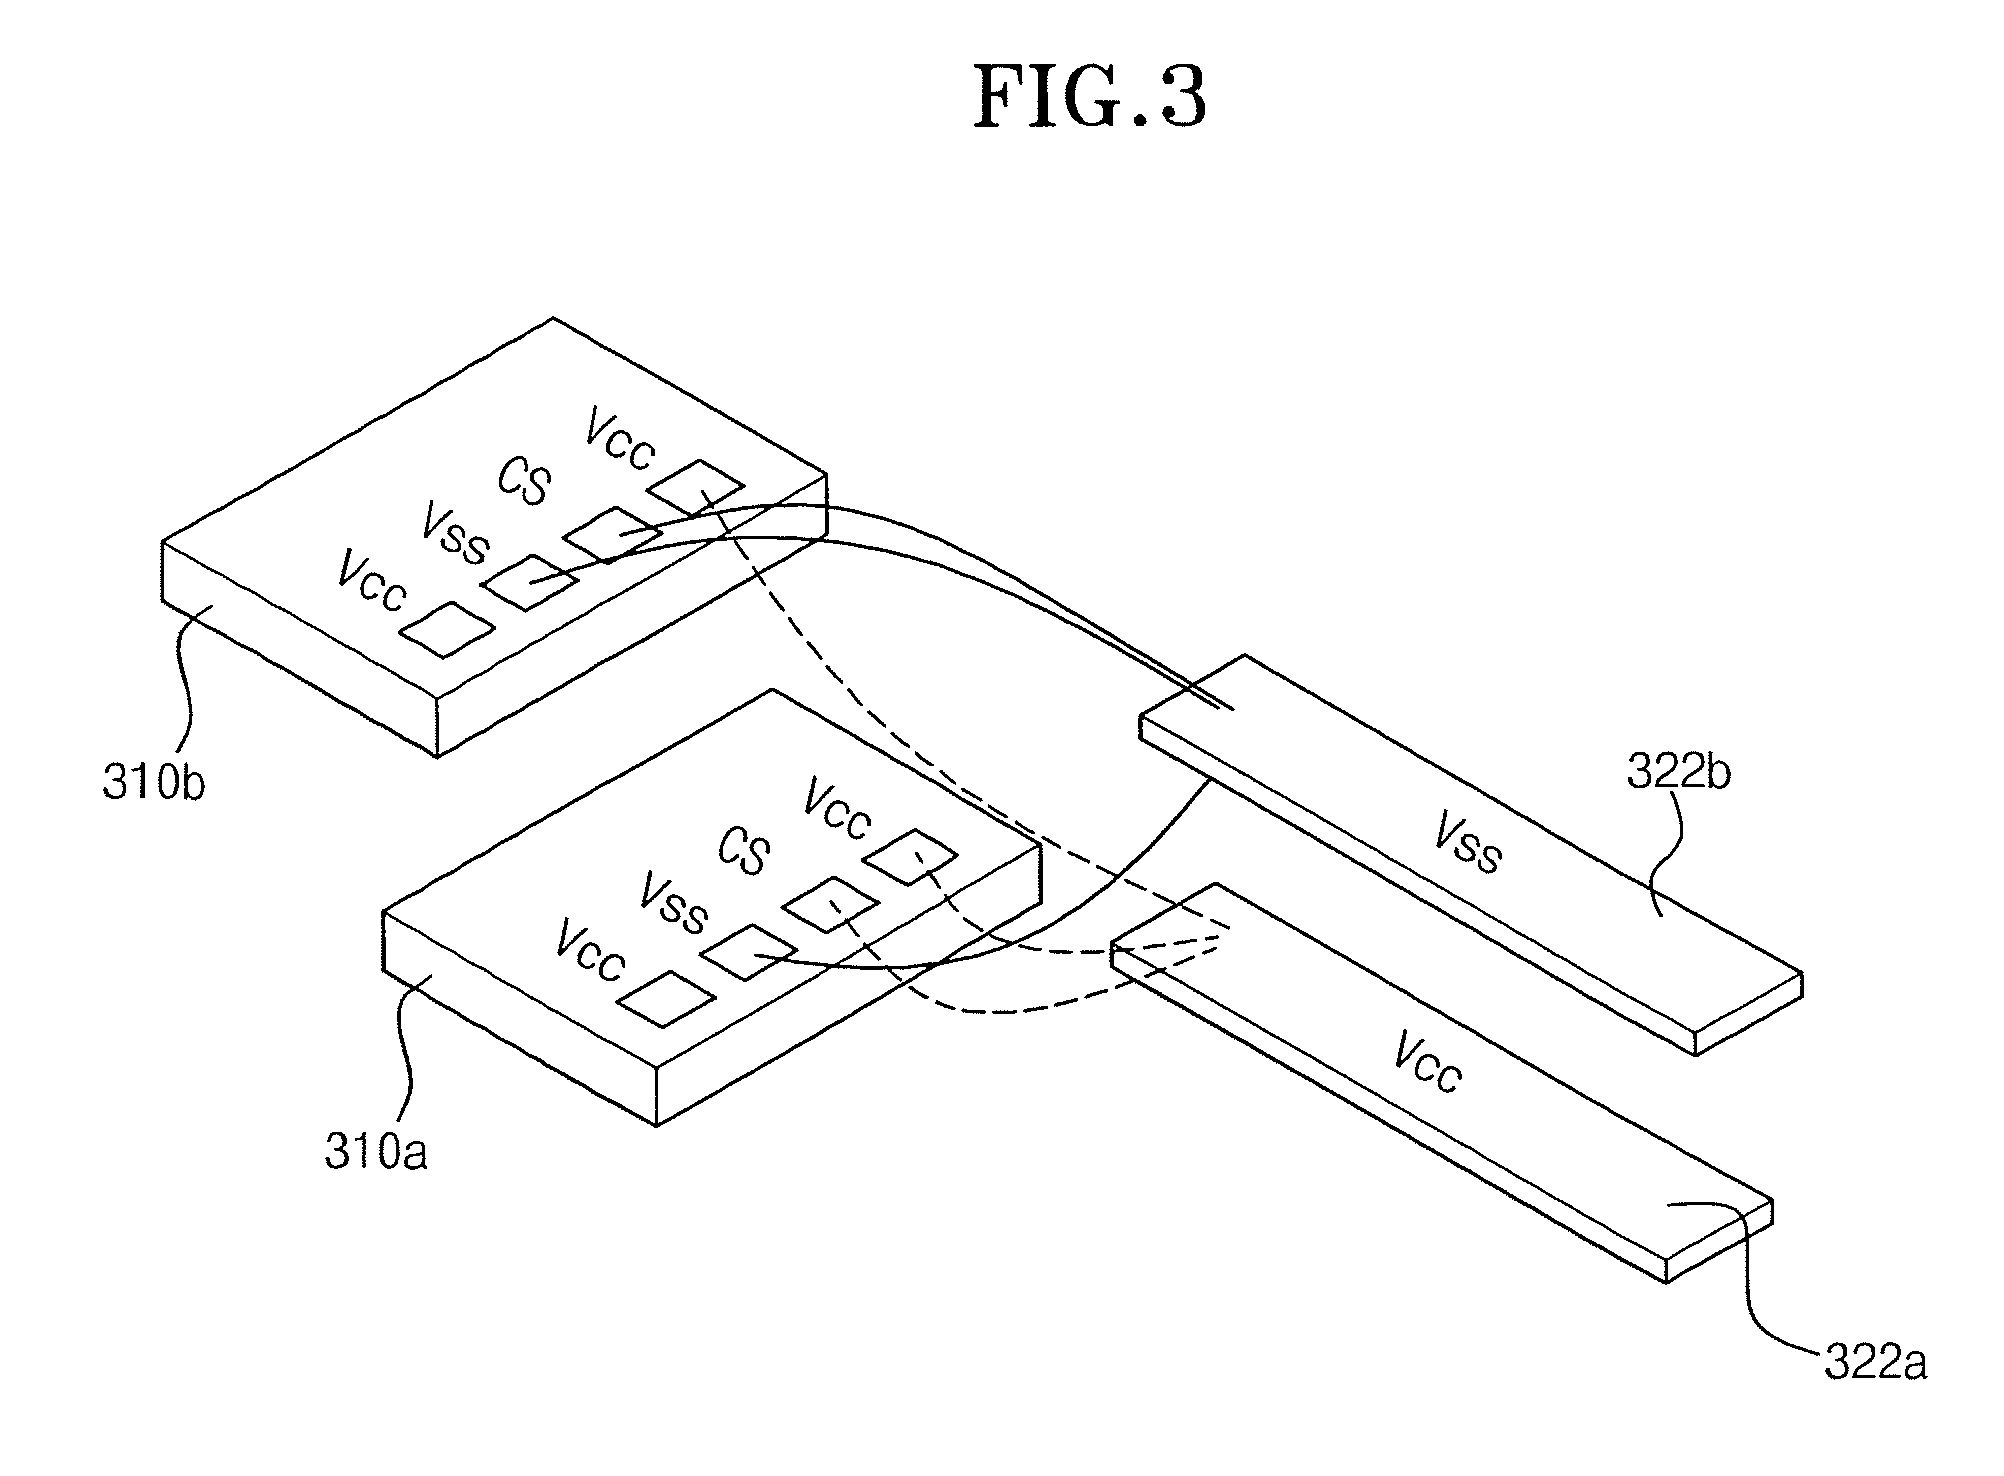 Through silicon via chip stack package capable of facilitating chip selection during device operation